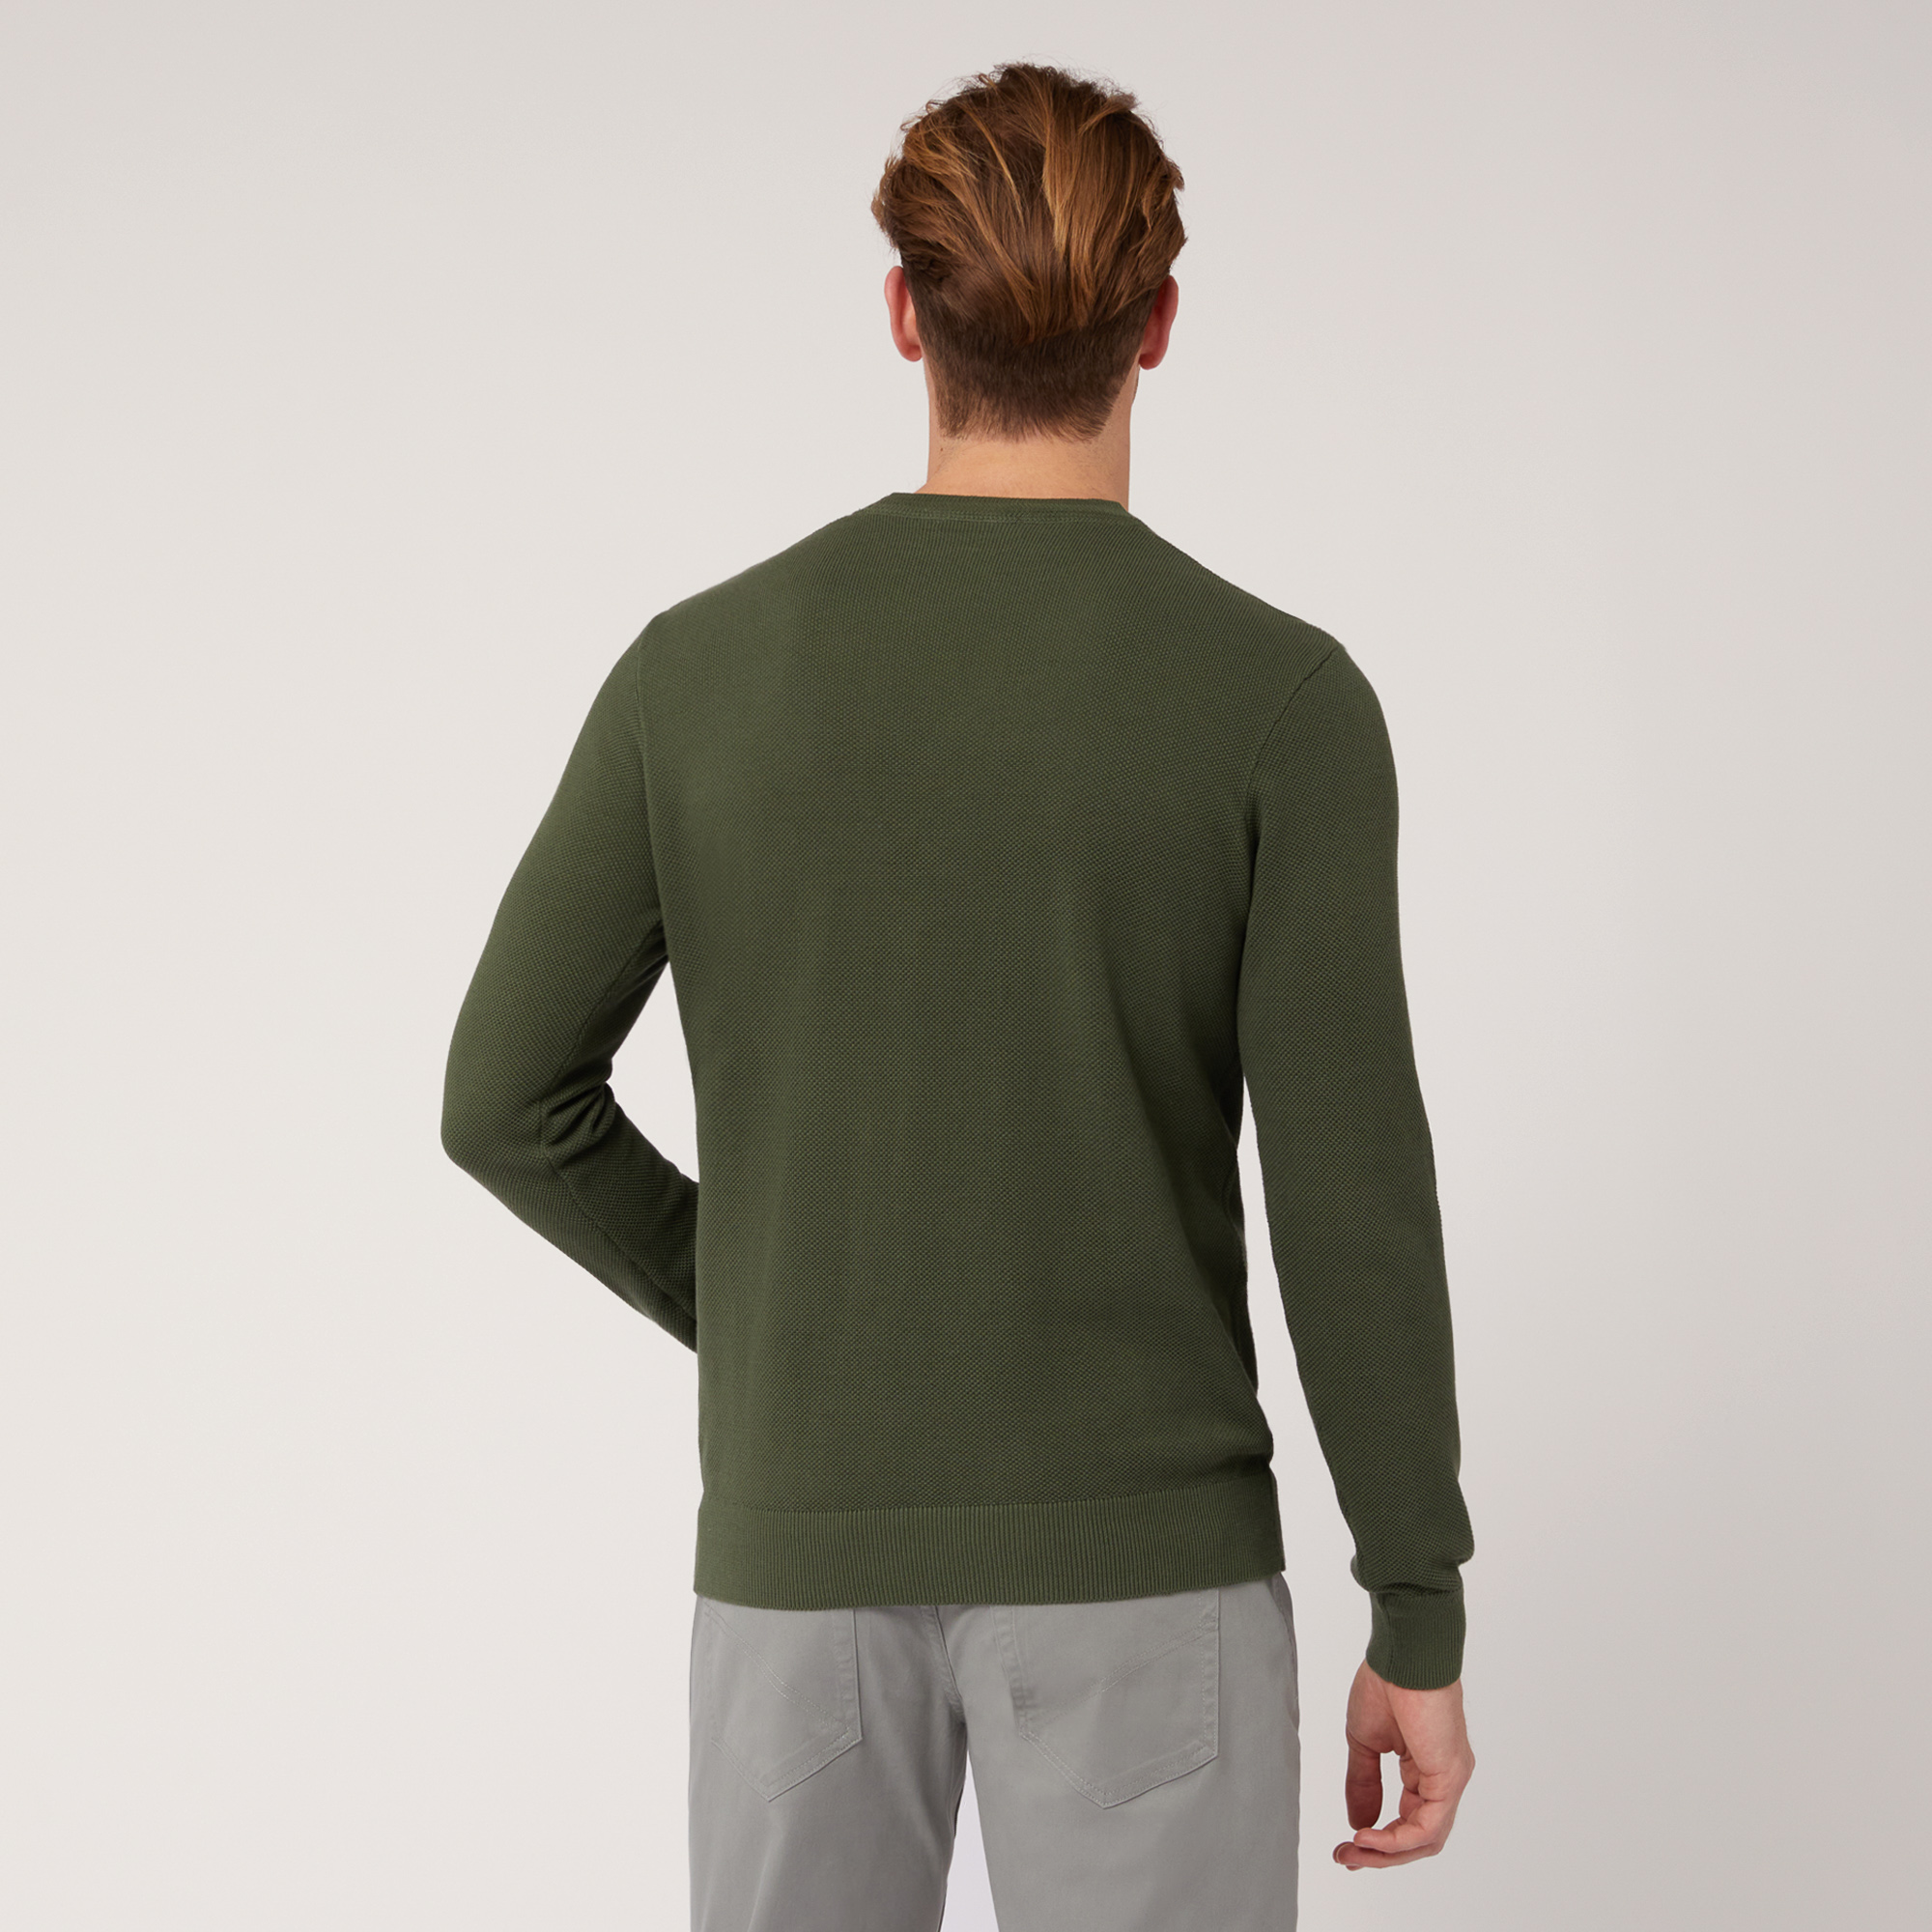 Pullover Girocollo Texture 3D, Verde, large image number 1